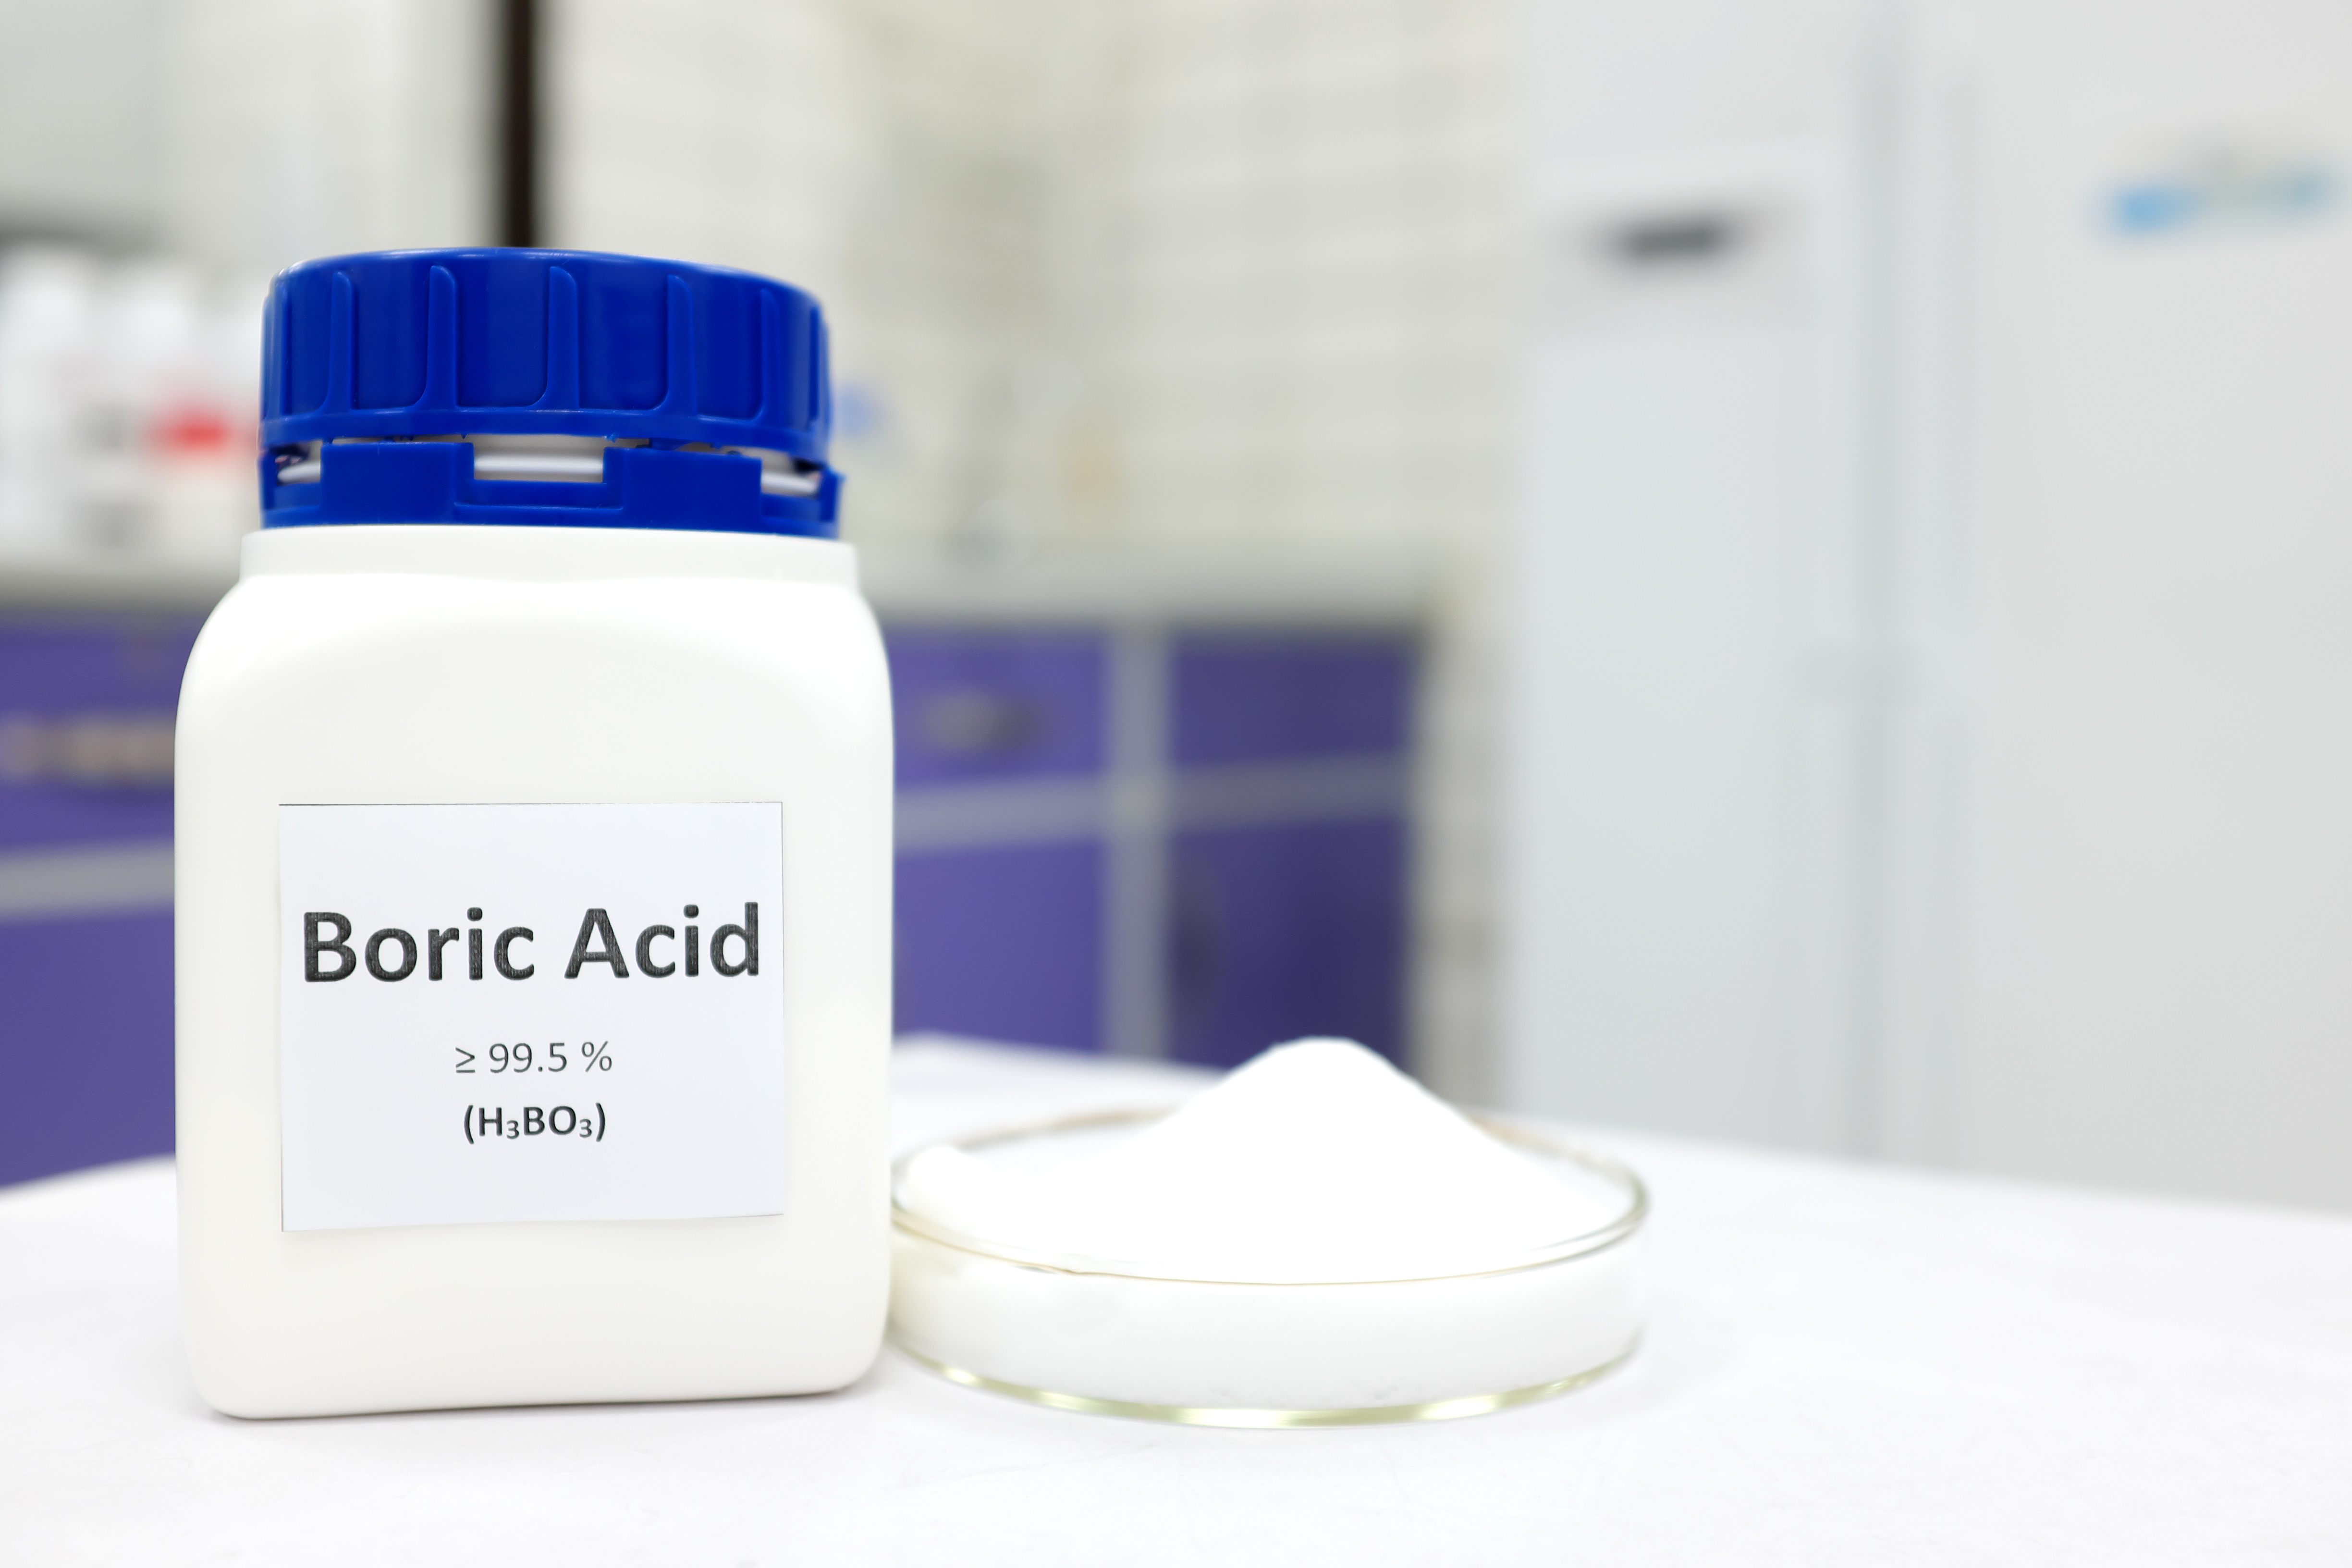 A close up photo of boric acid | Source: Shutterstock